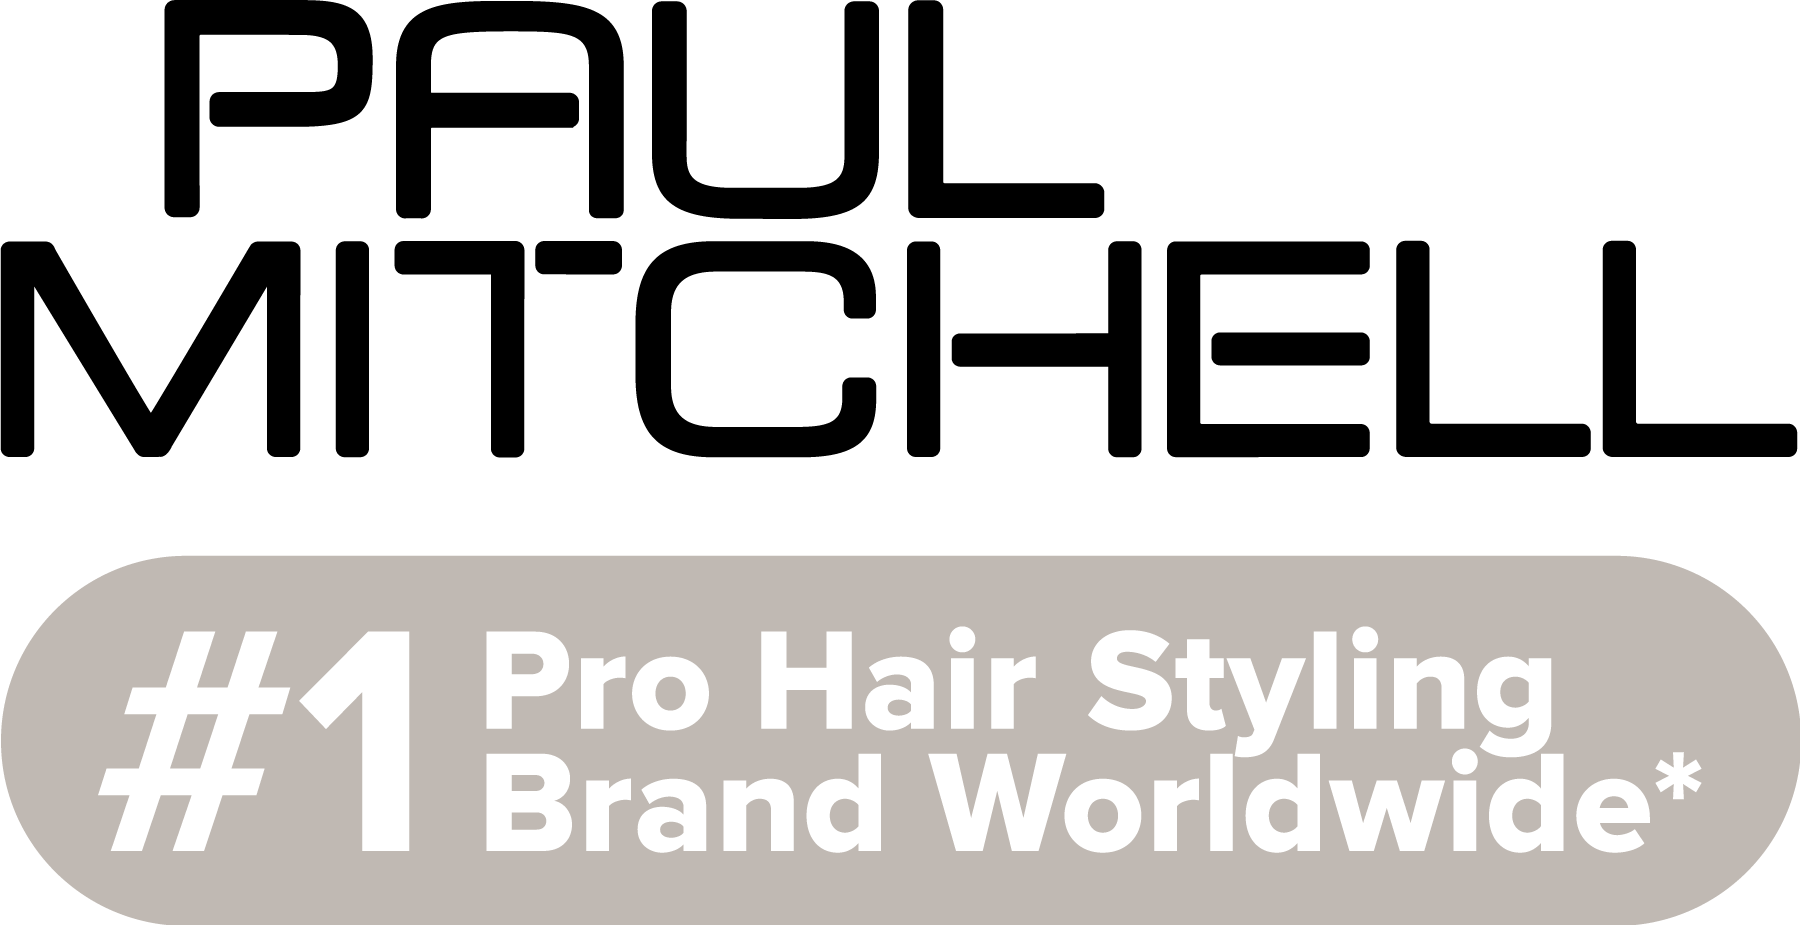 *Kline 2022 Salon Hair Care Global Series, for John Paul Mitchell Systems® master brand portfolio which includes Paul Mitchell®, based on value sales of products in 28 markets.